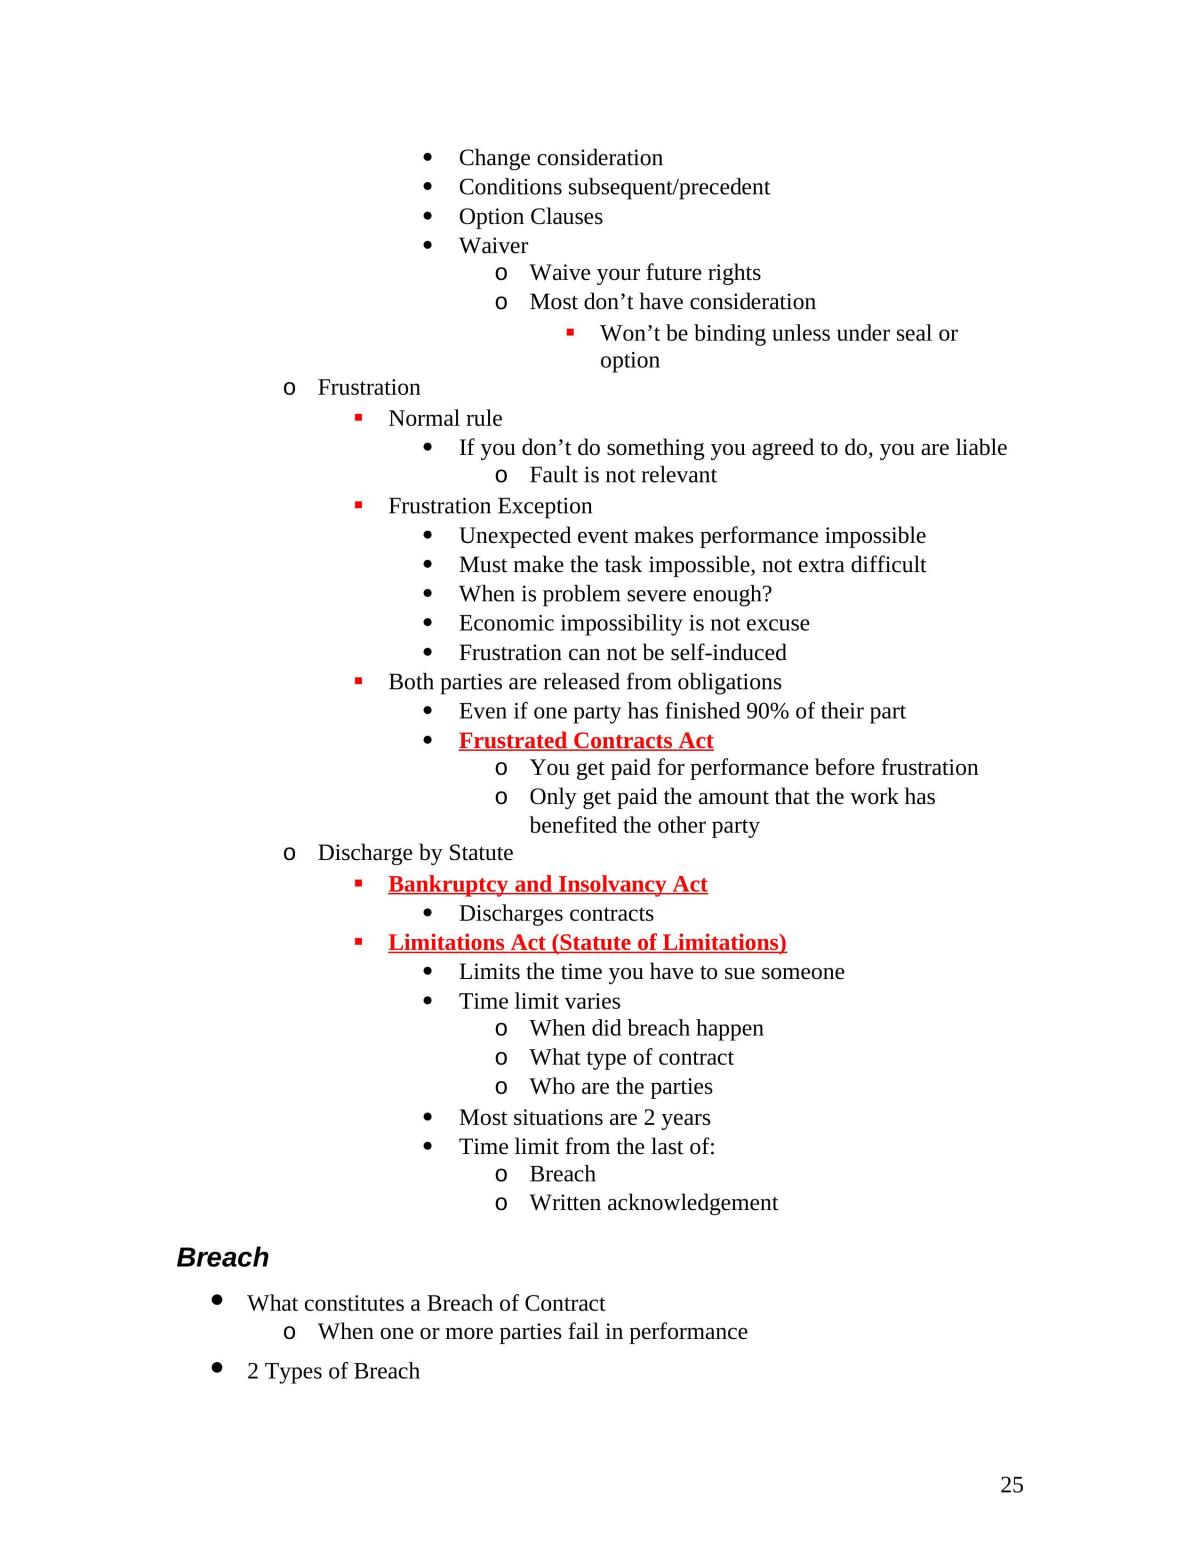 Complete Study Notes - COMM 4SD3 - Page 25